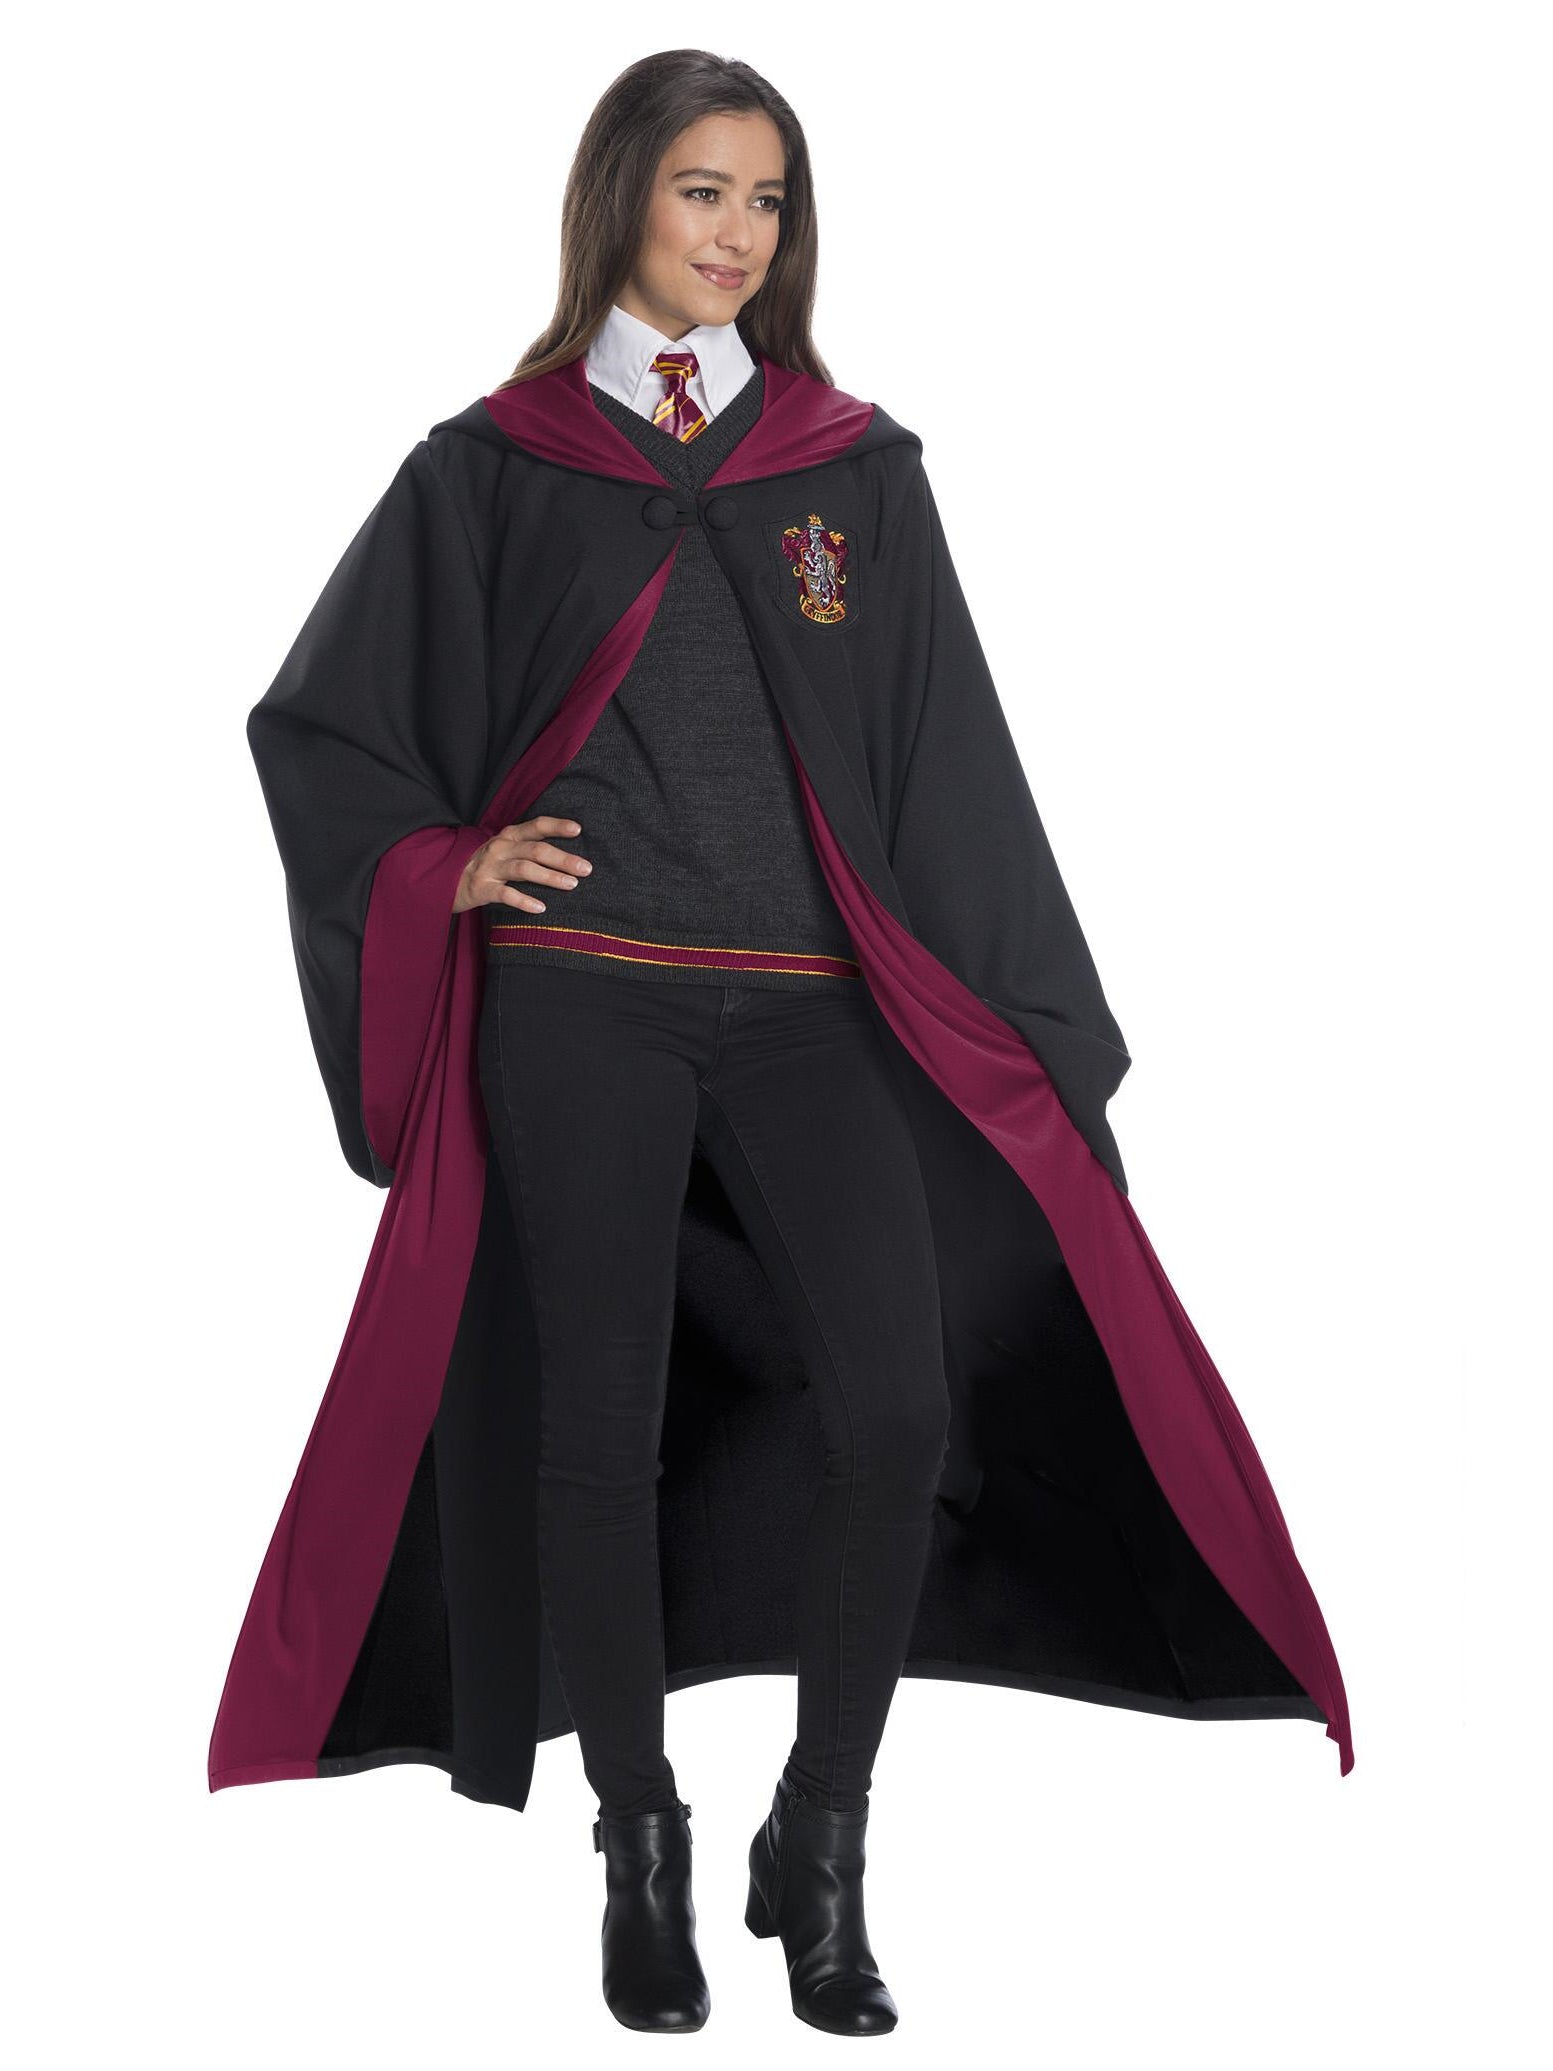 Gryffindor Student Costume for Adults | Mens | Costumes & Dress-up ...